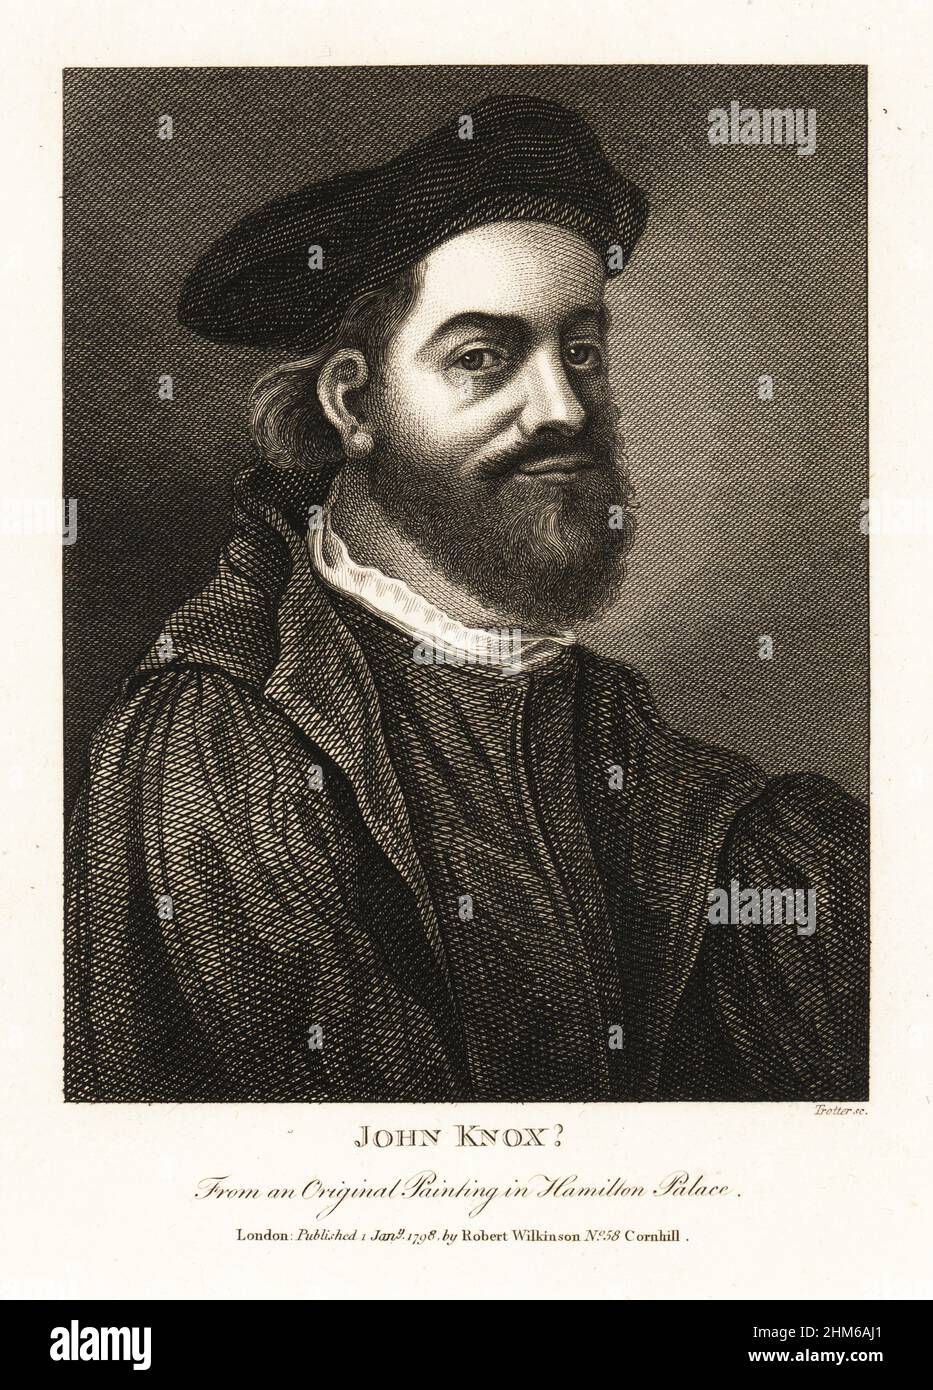 John Knox the younger(?), moderator of the Synod of Mersa in Germany, preacher at Rotterdam, author of the History of the Reformation of Religion within the Realme of Scotland, 1581. From an original painting in Hamilton Palace. Copperplate engraving by Thomas Trotter from John Smith’s Iconographia Scotica, or portraits of illustrious persons of Scotland, Robert Wilkinson, 58 Cornhill, London, 1798. Stock Photo